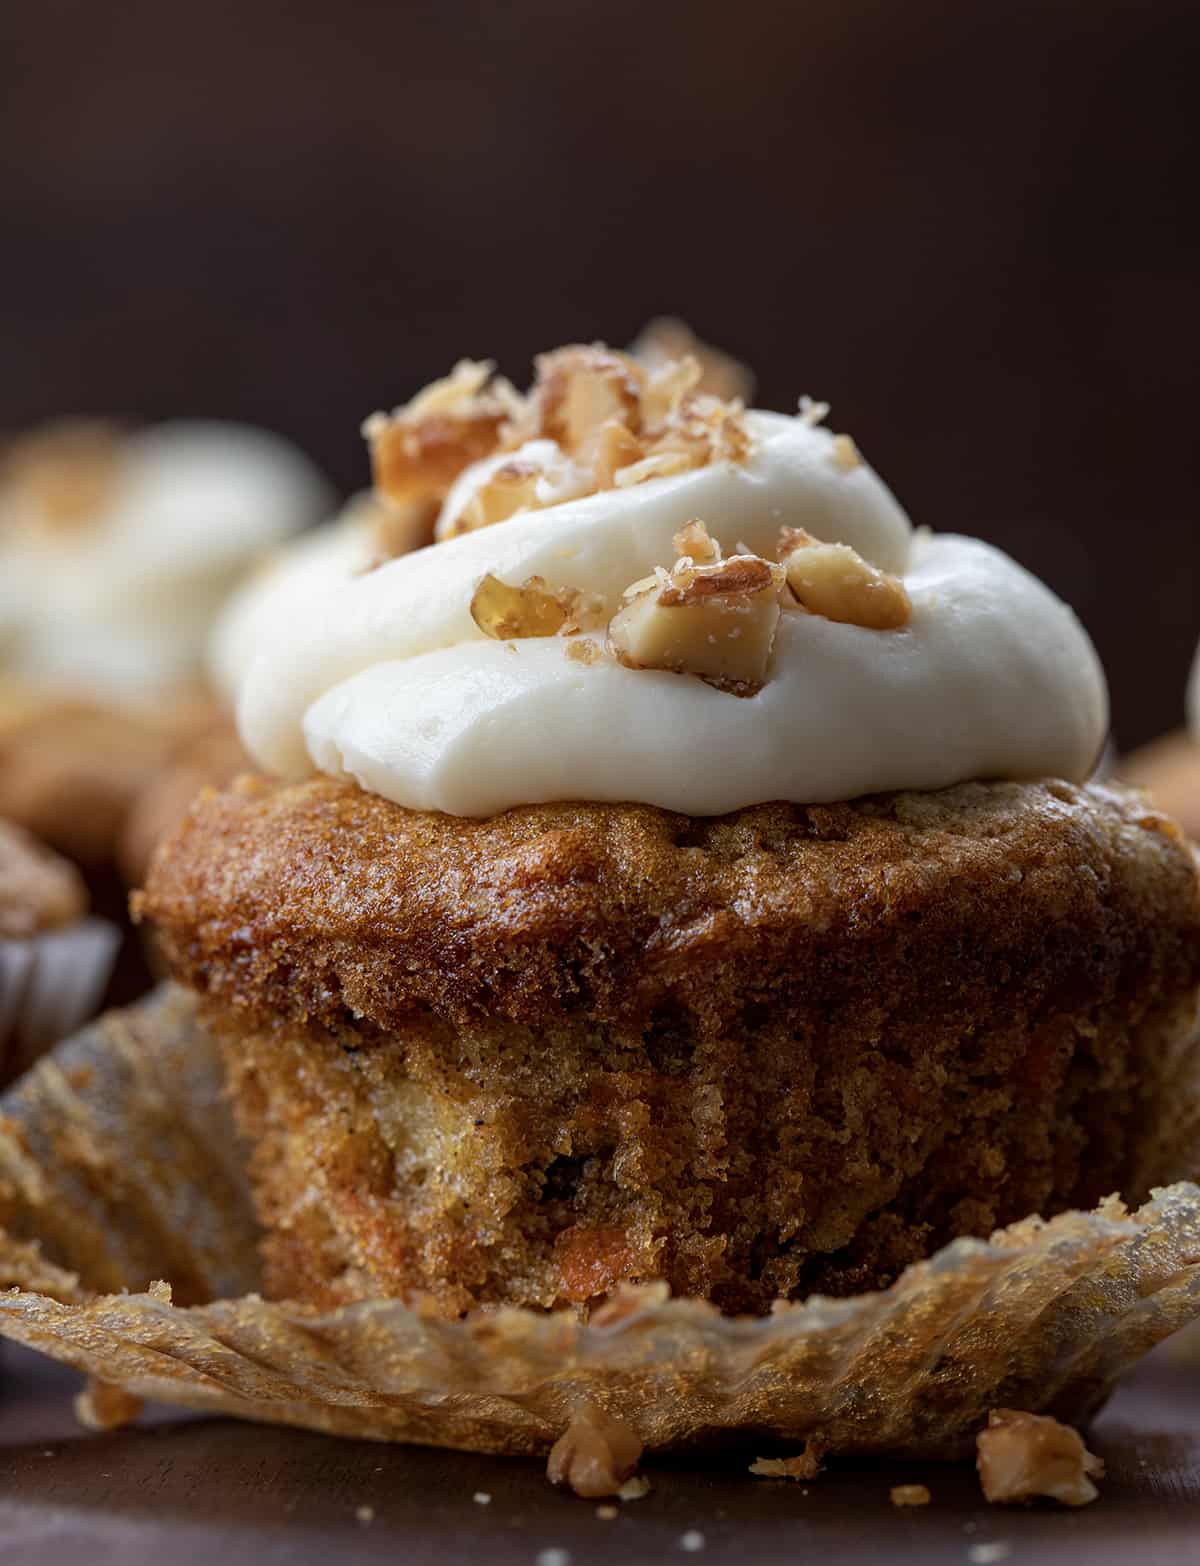 Close up of a Carrot Cake Cupcake with Wrapper Peeled Back and Candied Walnuts on Top of the Cream Cheese Frosting.